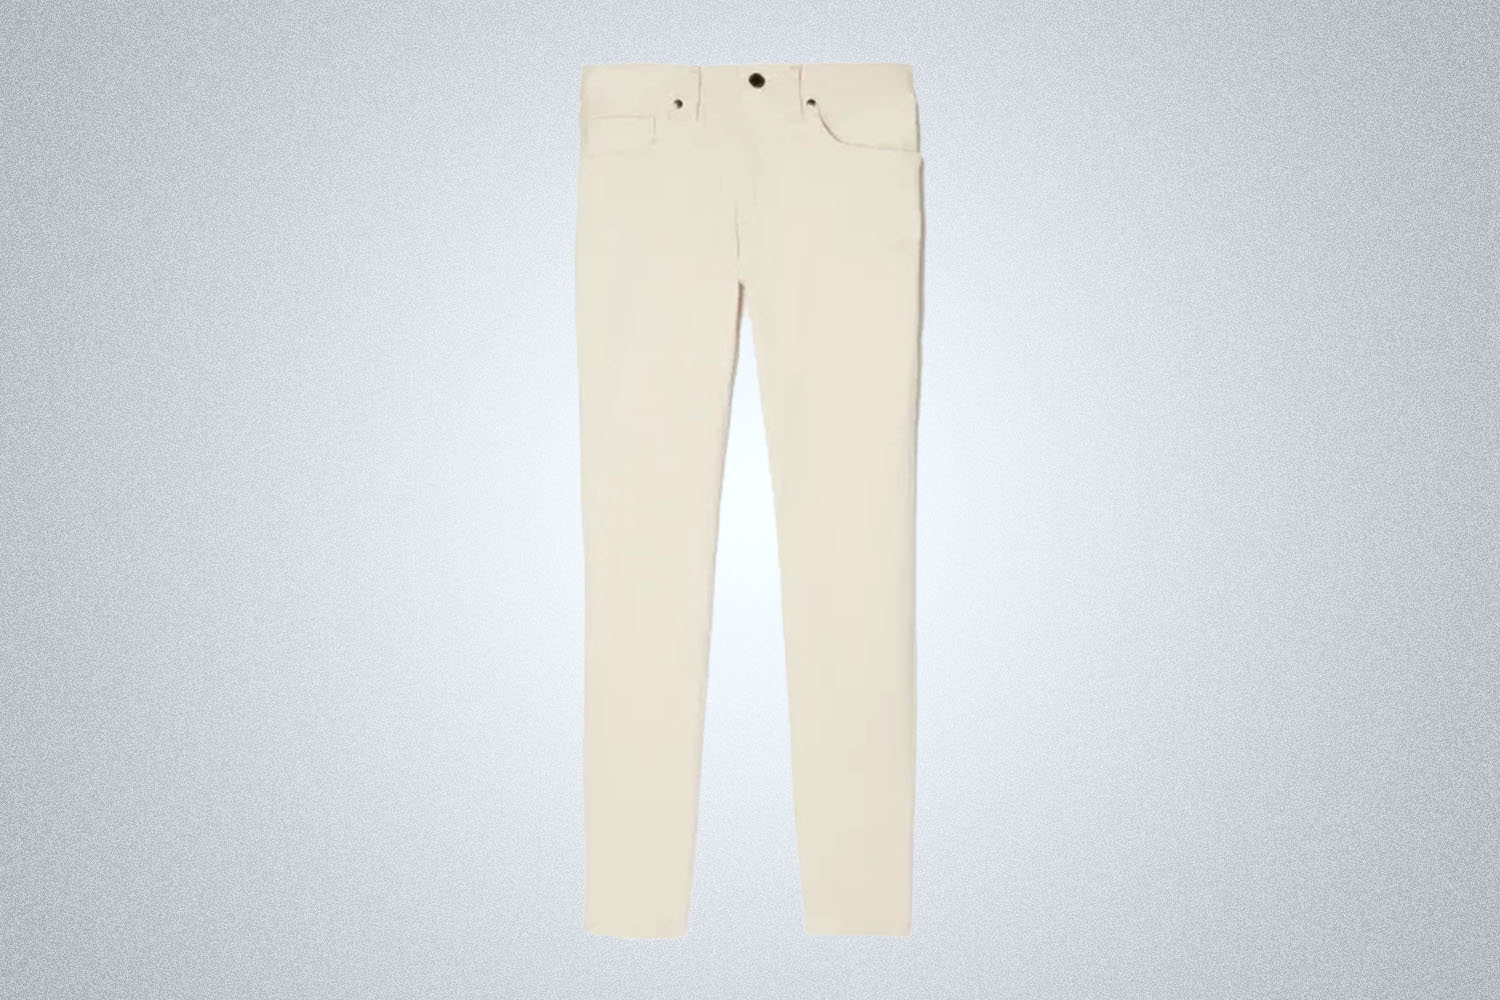 a pair of white slim-cut denim from Everlane on a grey background